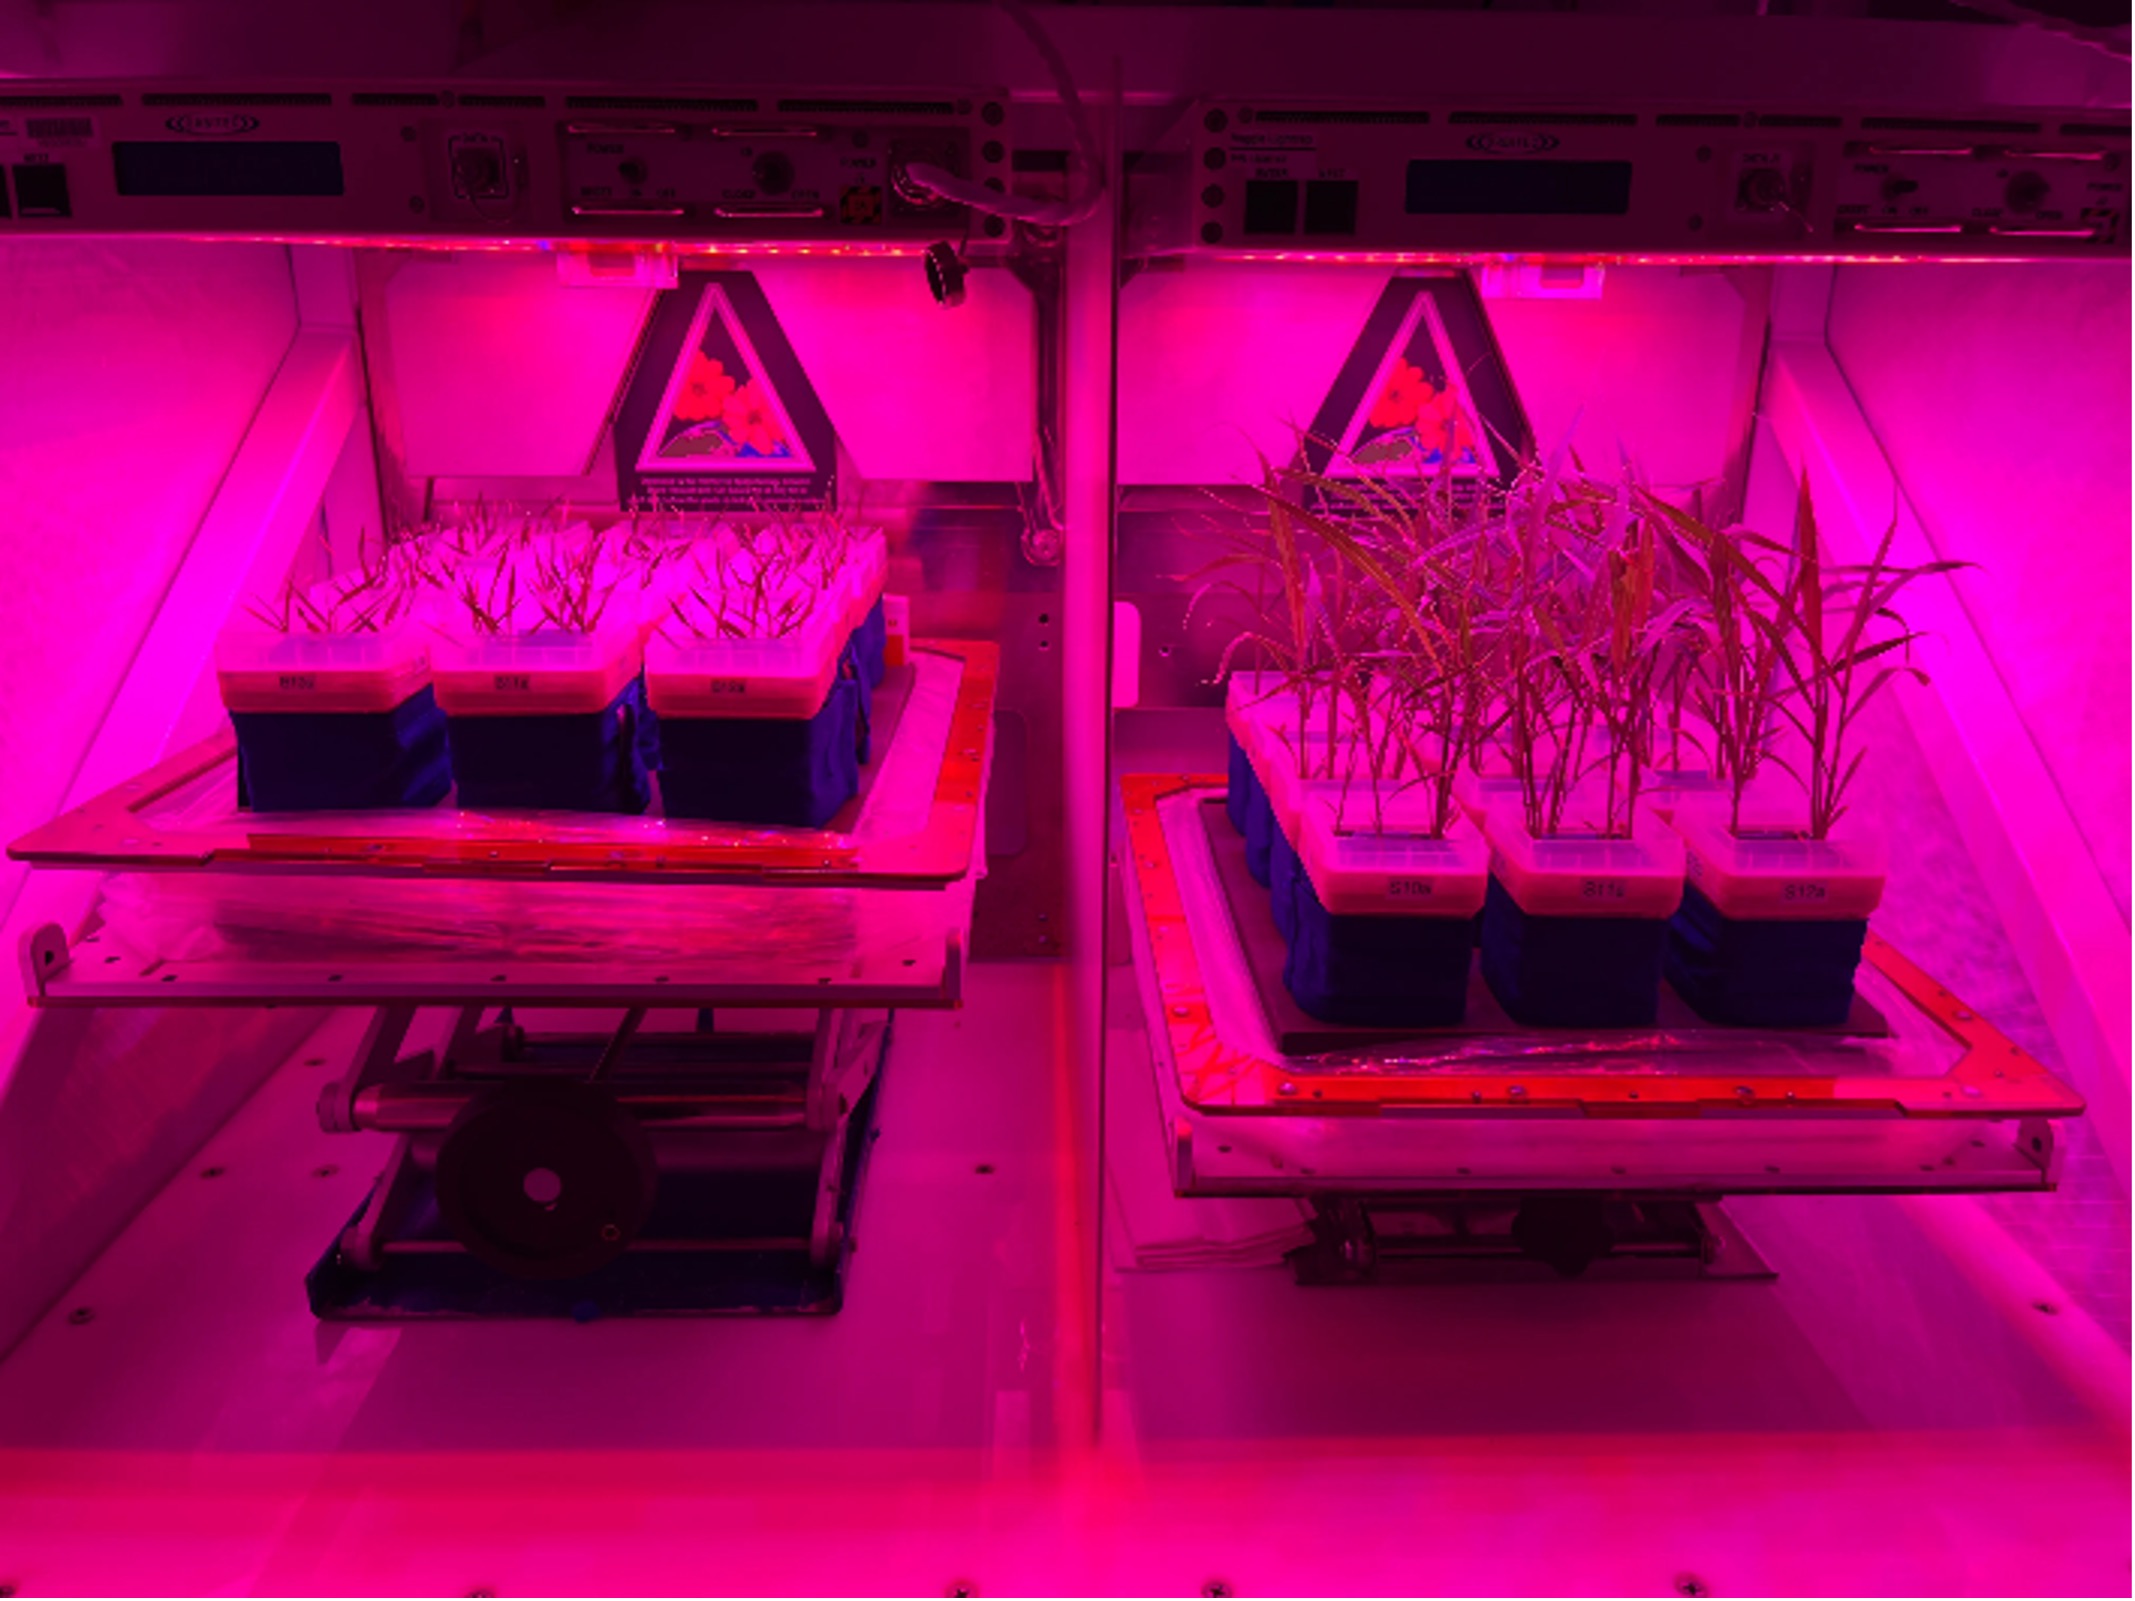 A split screen containing two square boxes, filtered by a cool magenta light. Each box is divided into nine smaller boxes containing plants at various stages of growth.